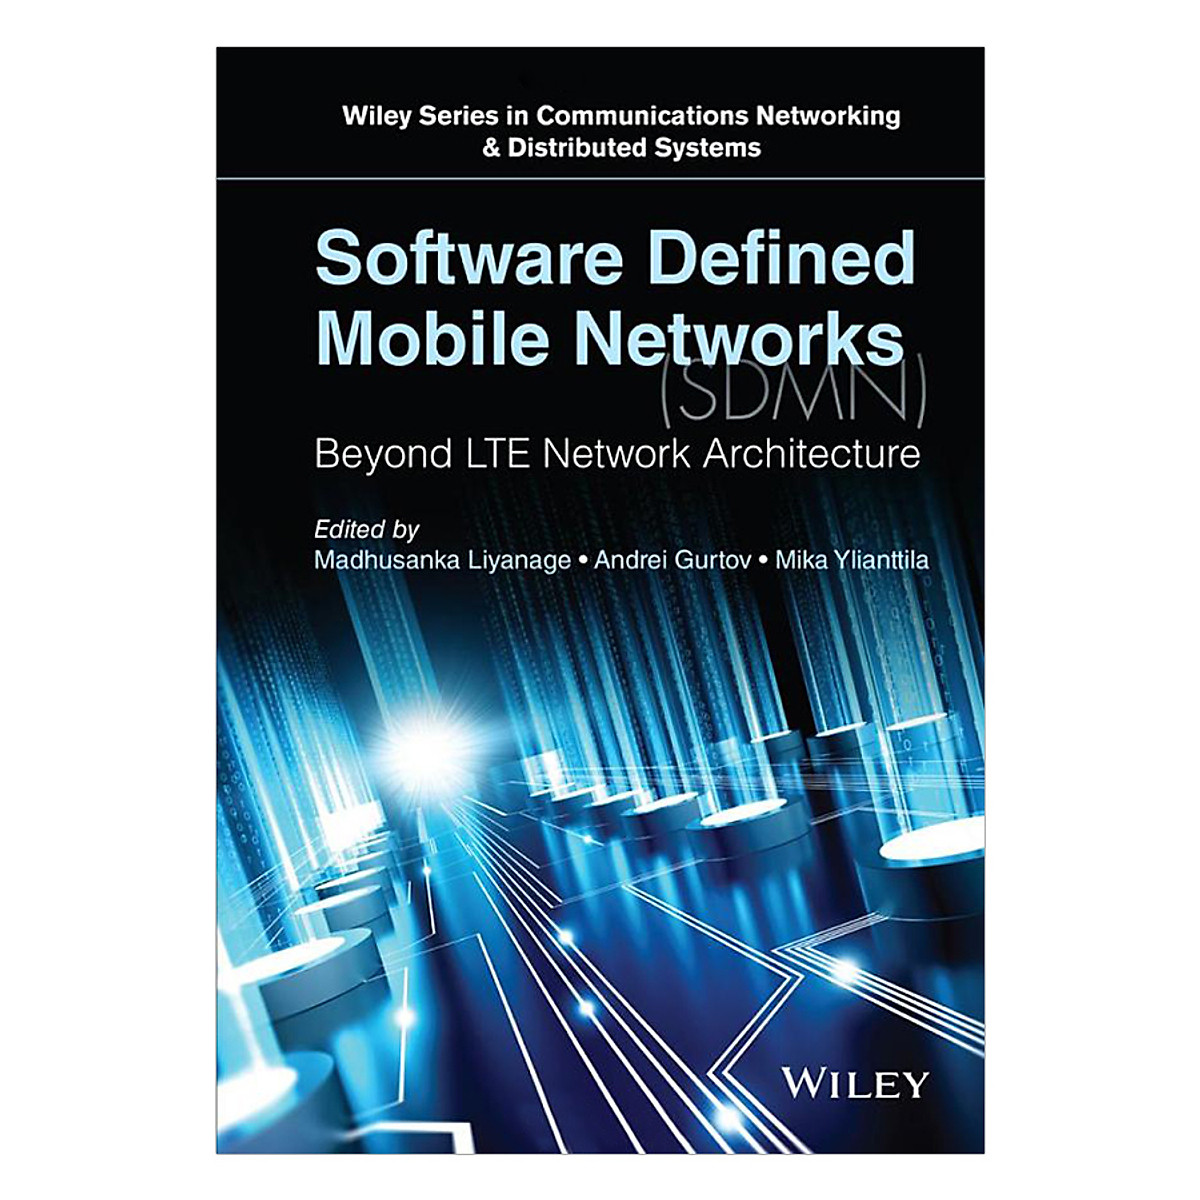 Software Defined Mobile Networks (SDMN) - Beyond LTE Network Architecture